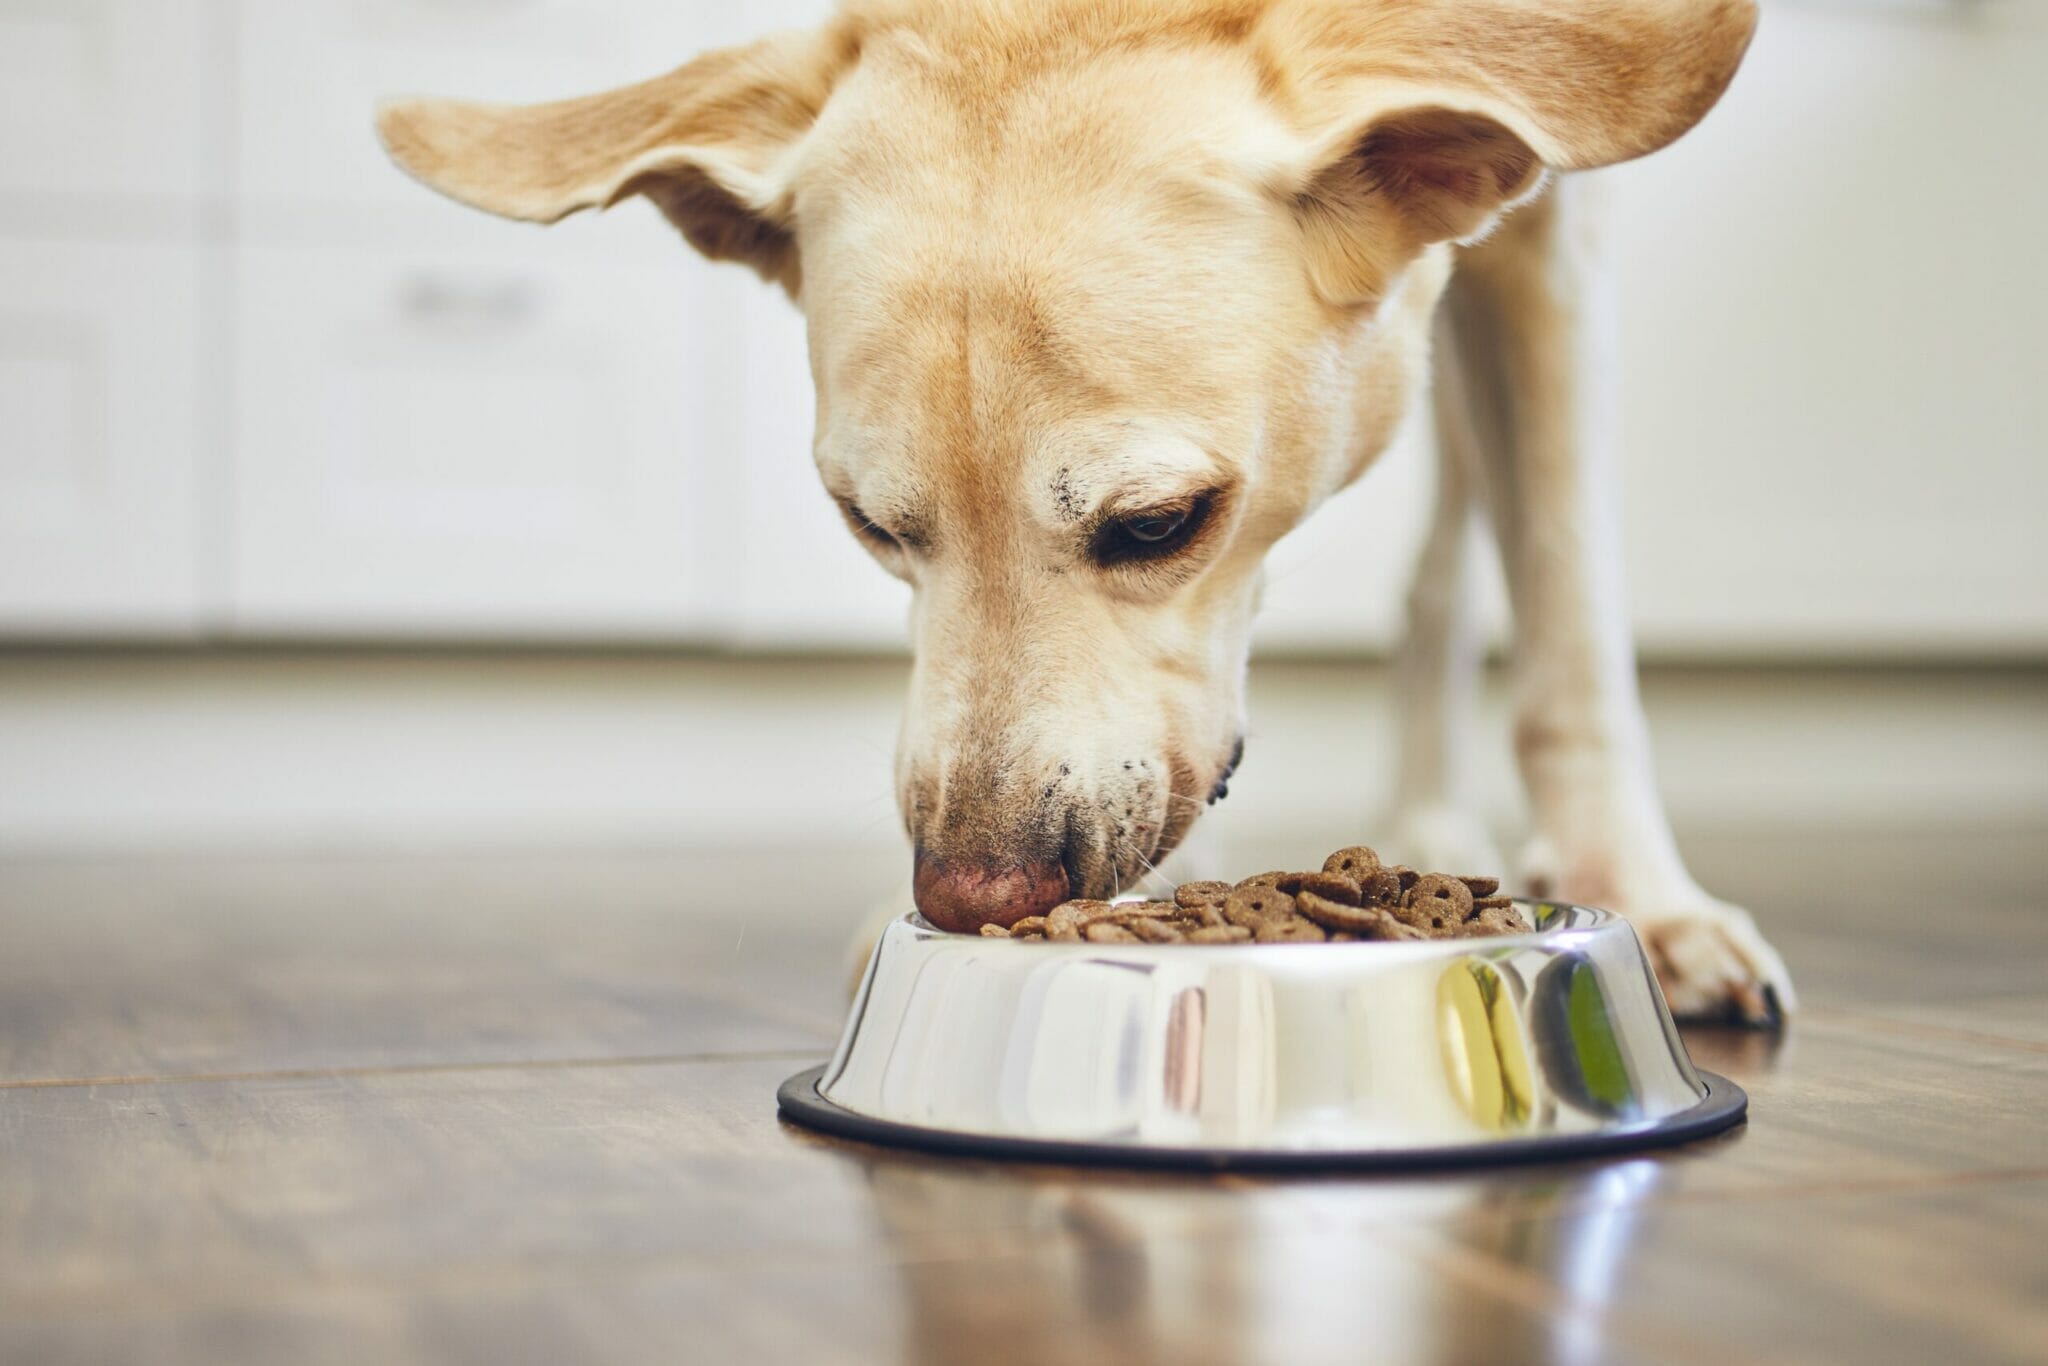 Should you switch your dog to a low residue diet?